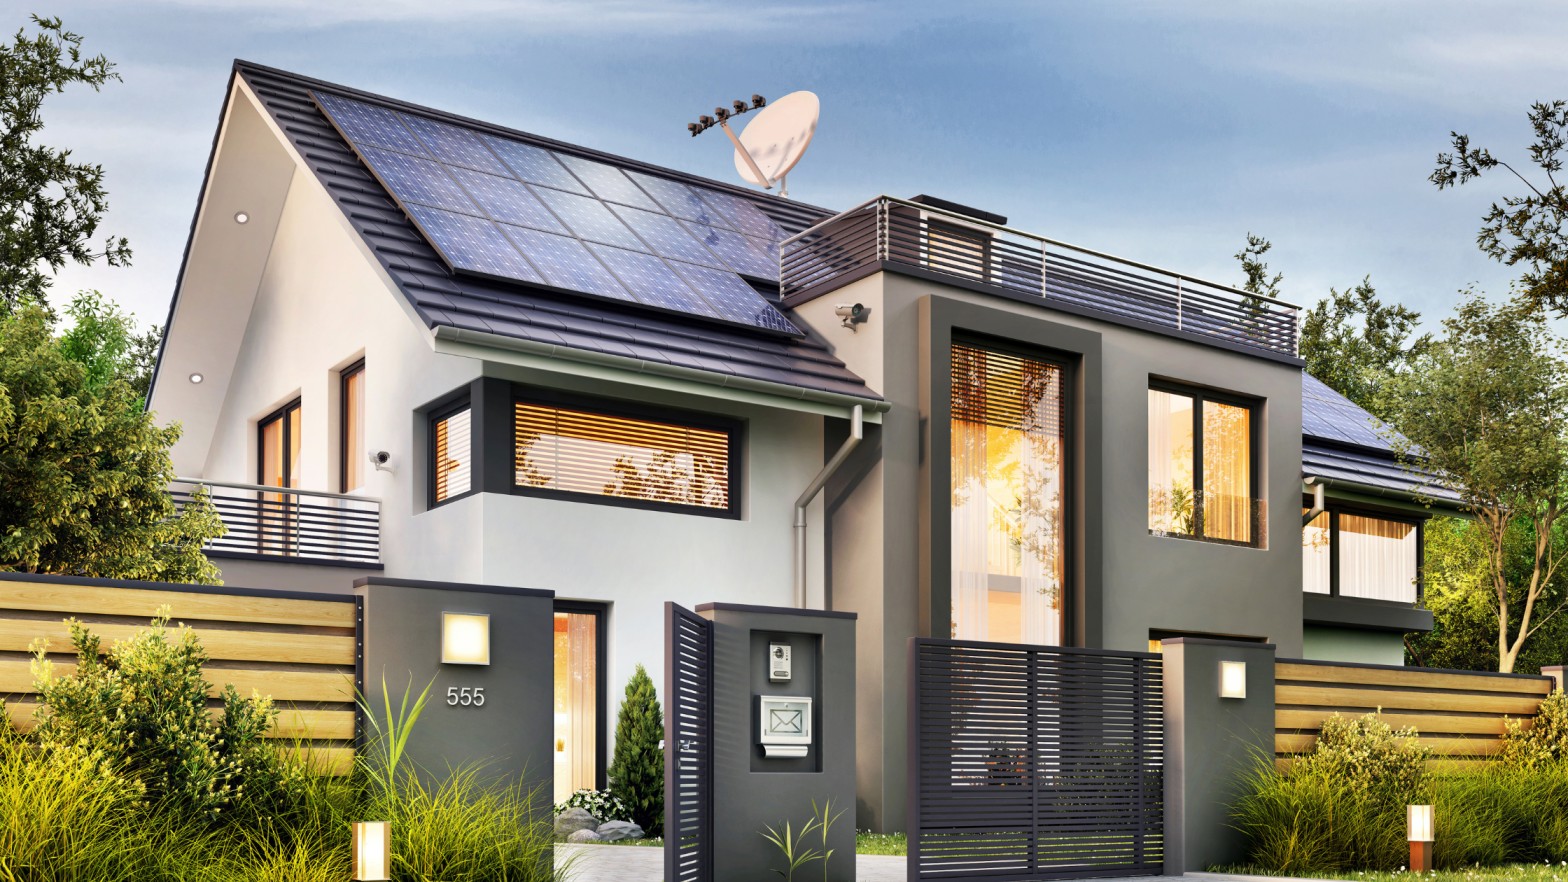 Factors to Consider When Choosing Solar Panels in Hove